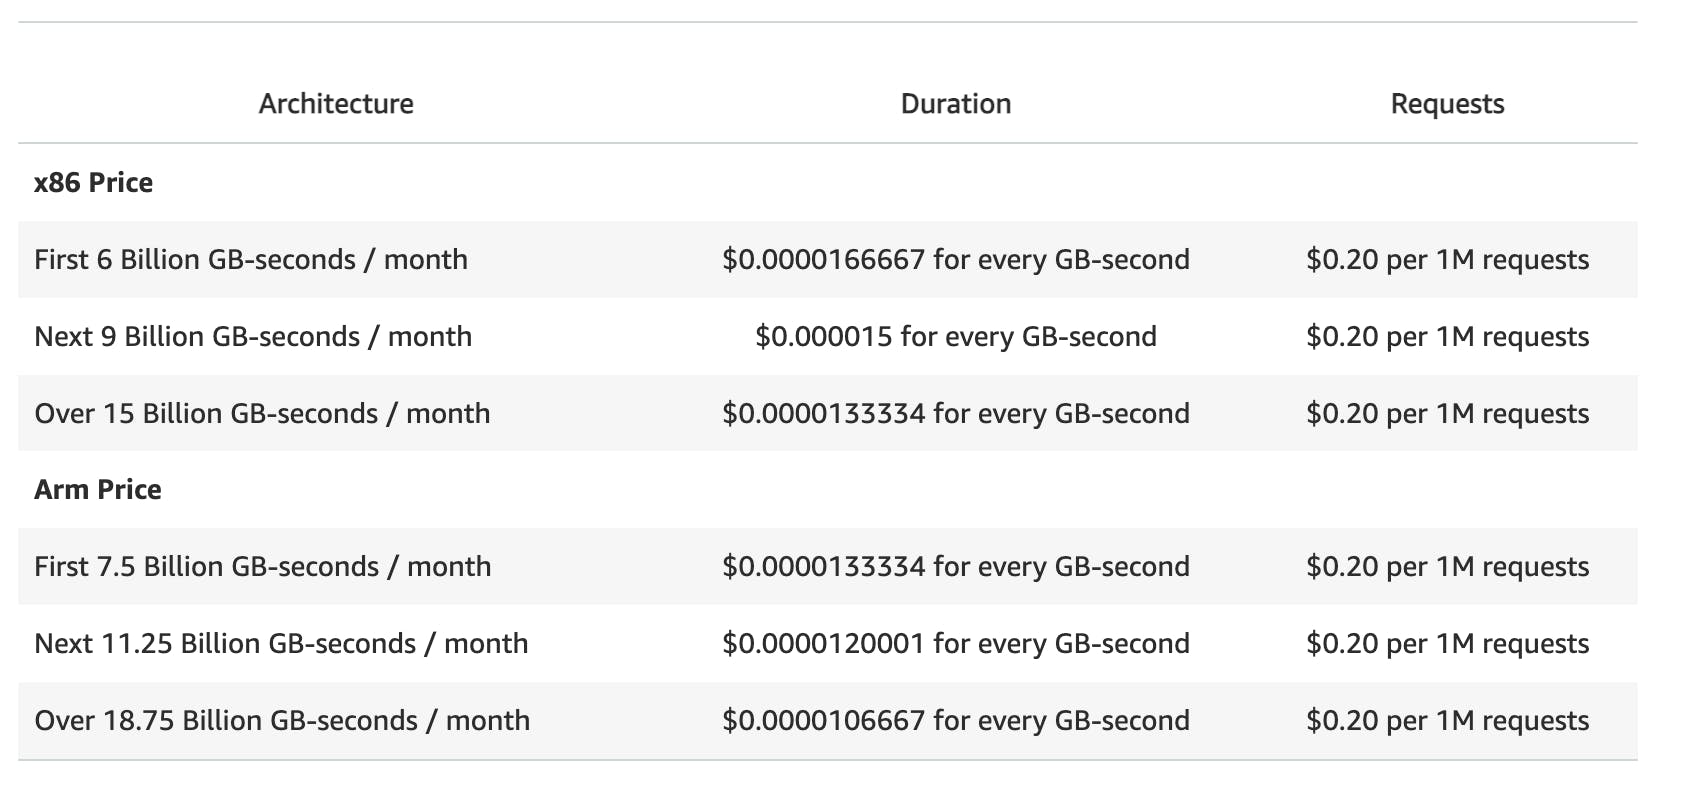 AWS Lambda Pricing in different tiers and different architectures